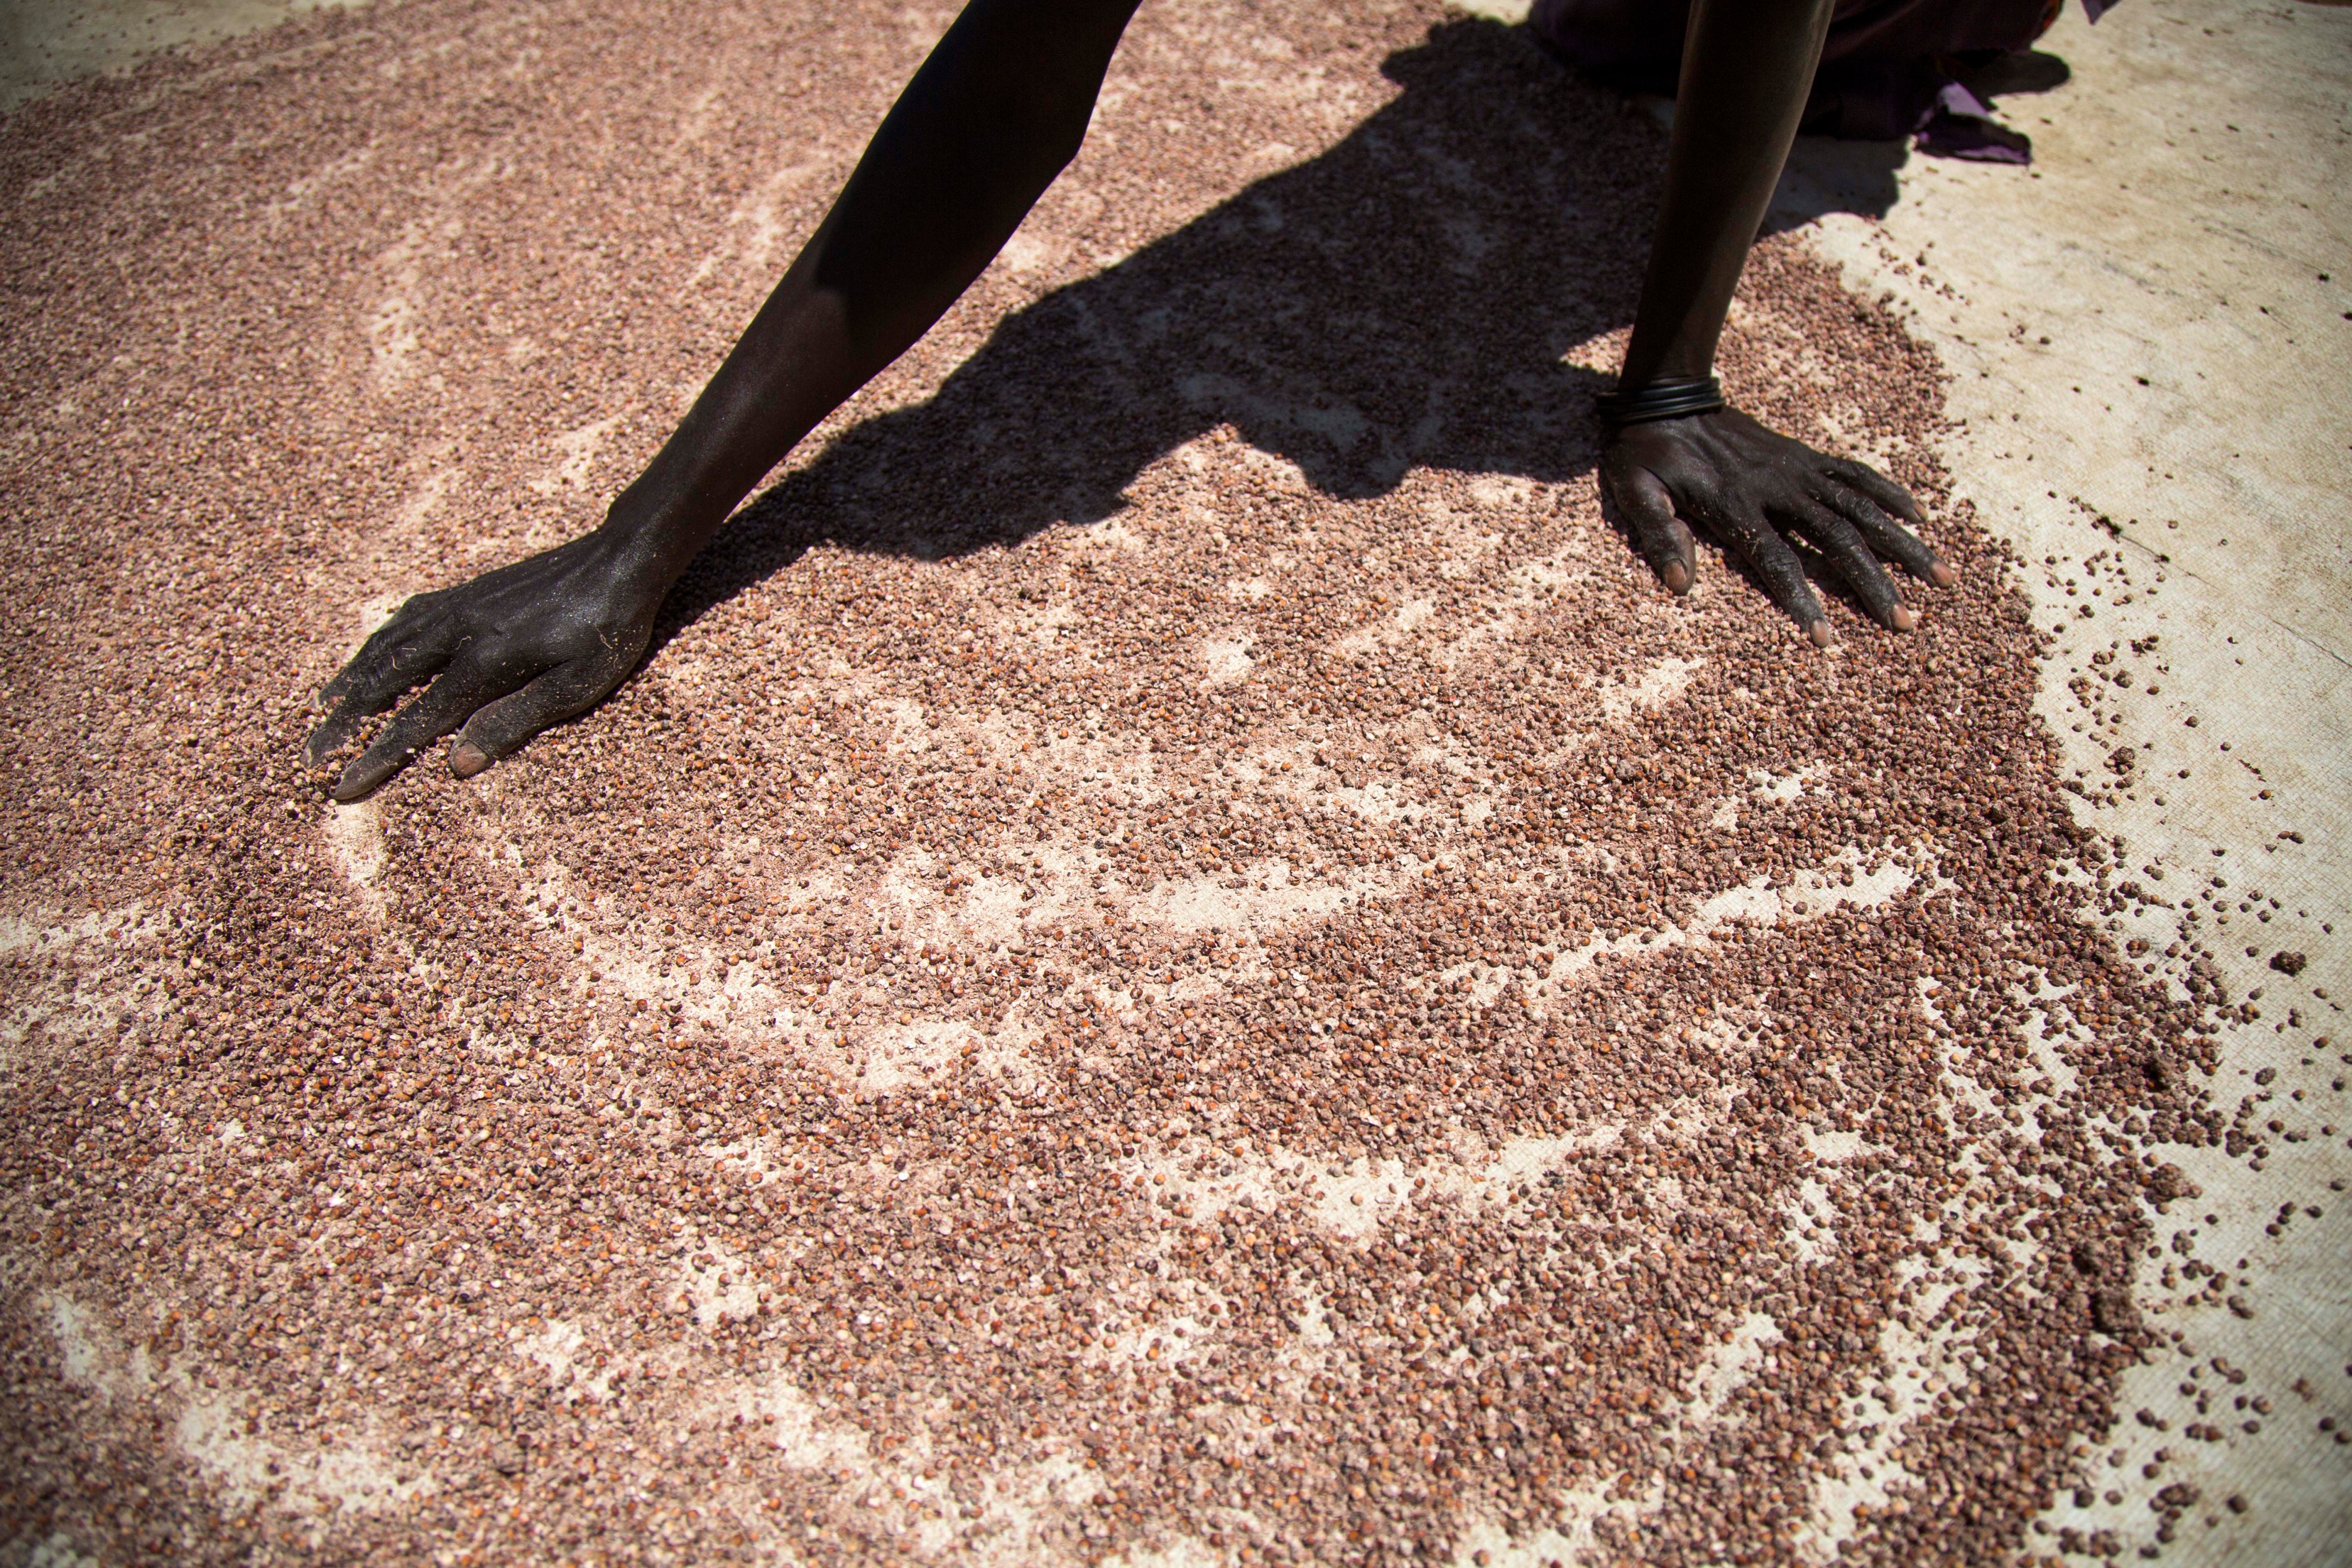 A woman dries a small quantity of sorghum on May 31, 2017, outside her house in Panthau, Northern Bahr al Ghazal, South Sudan. (Albert Gonzalez Farran&mdash;AFP/Getty Images)